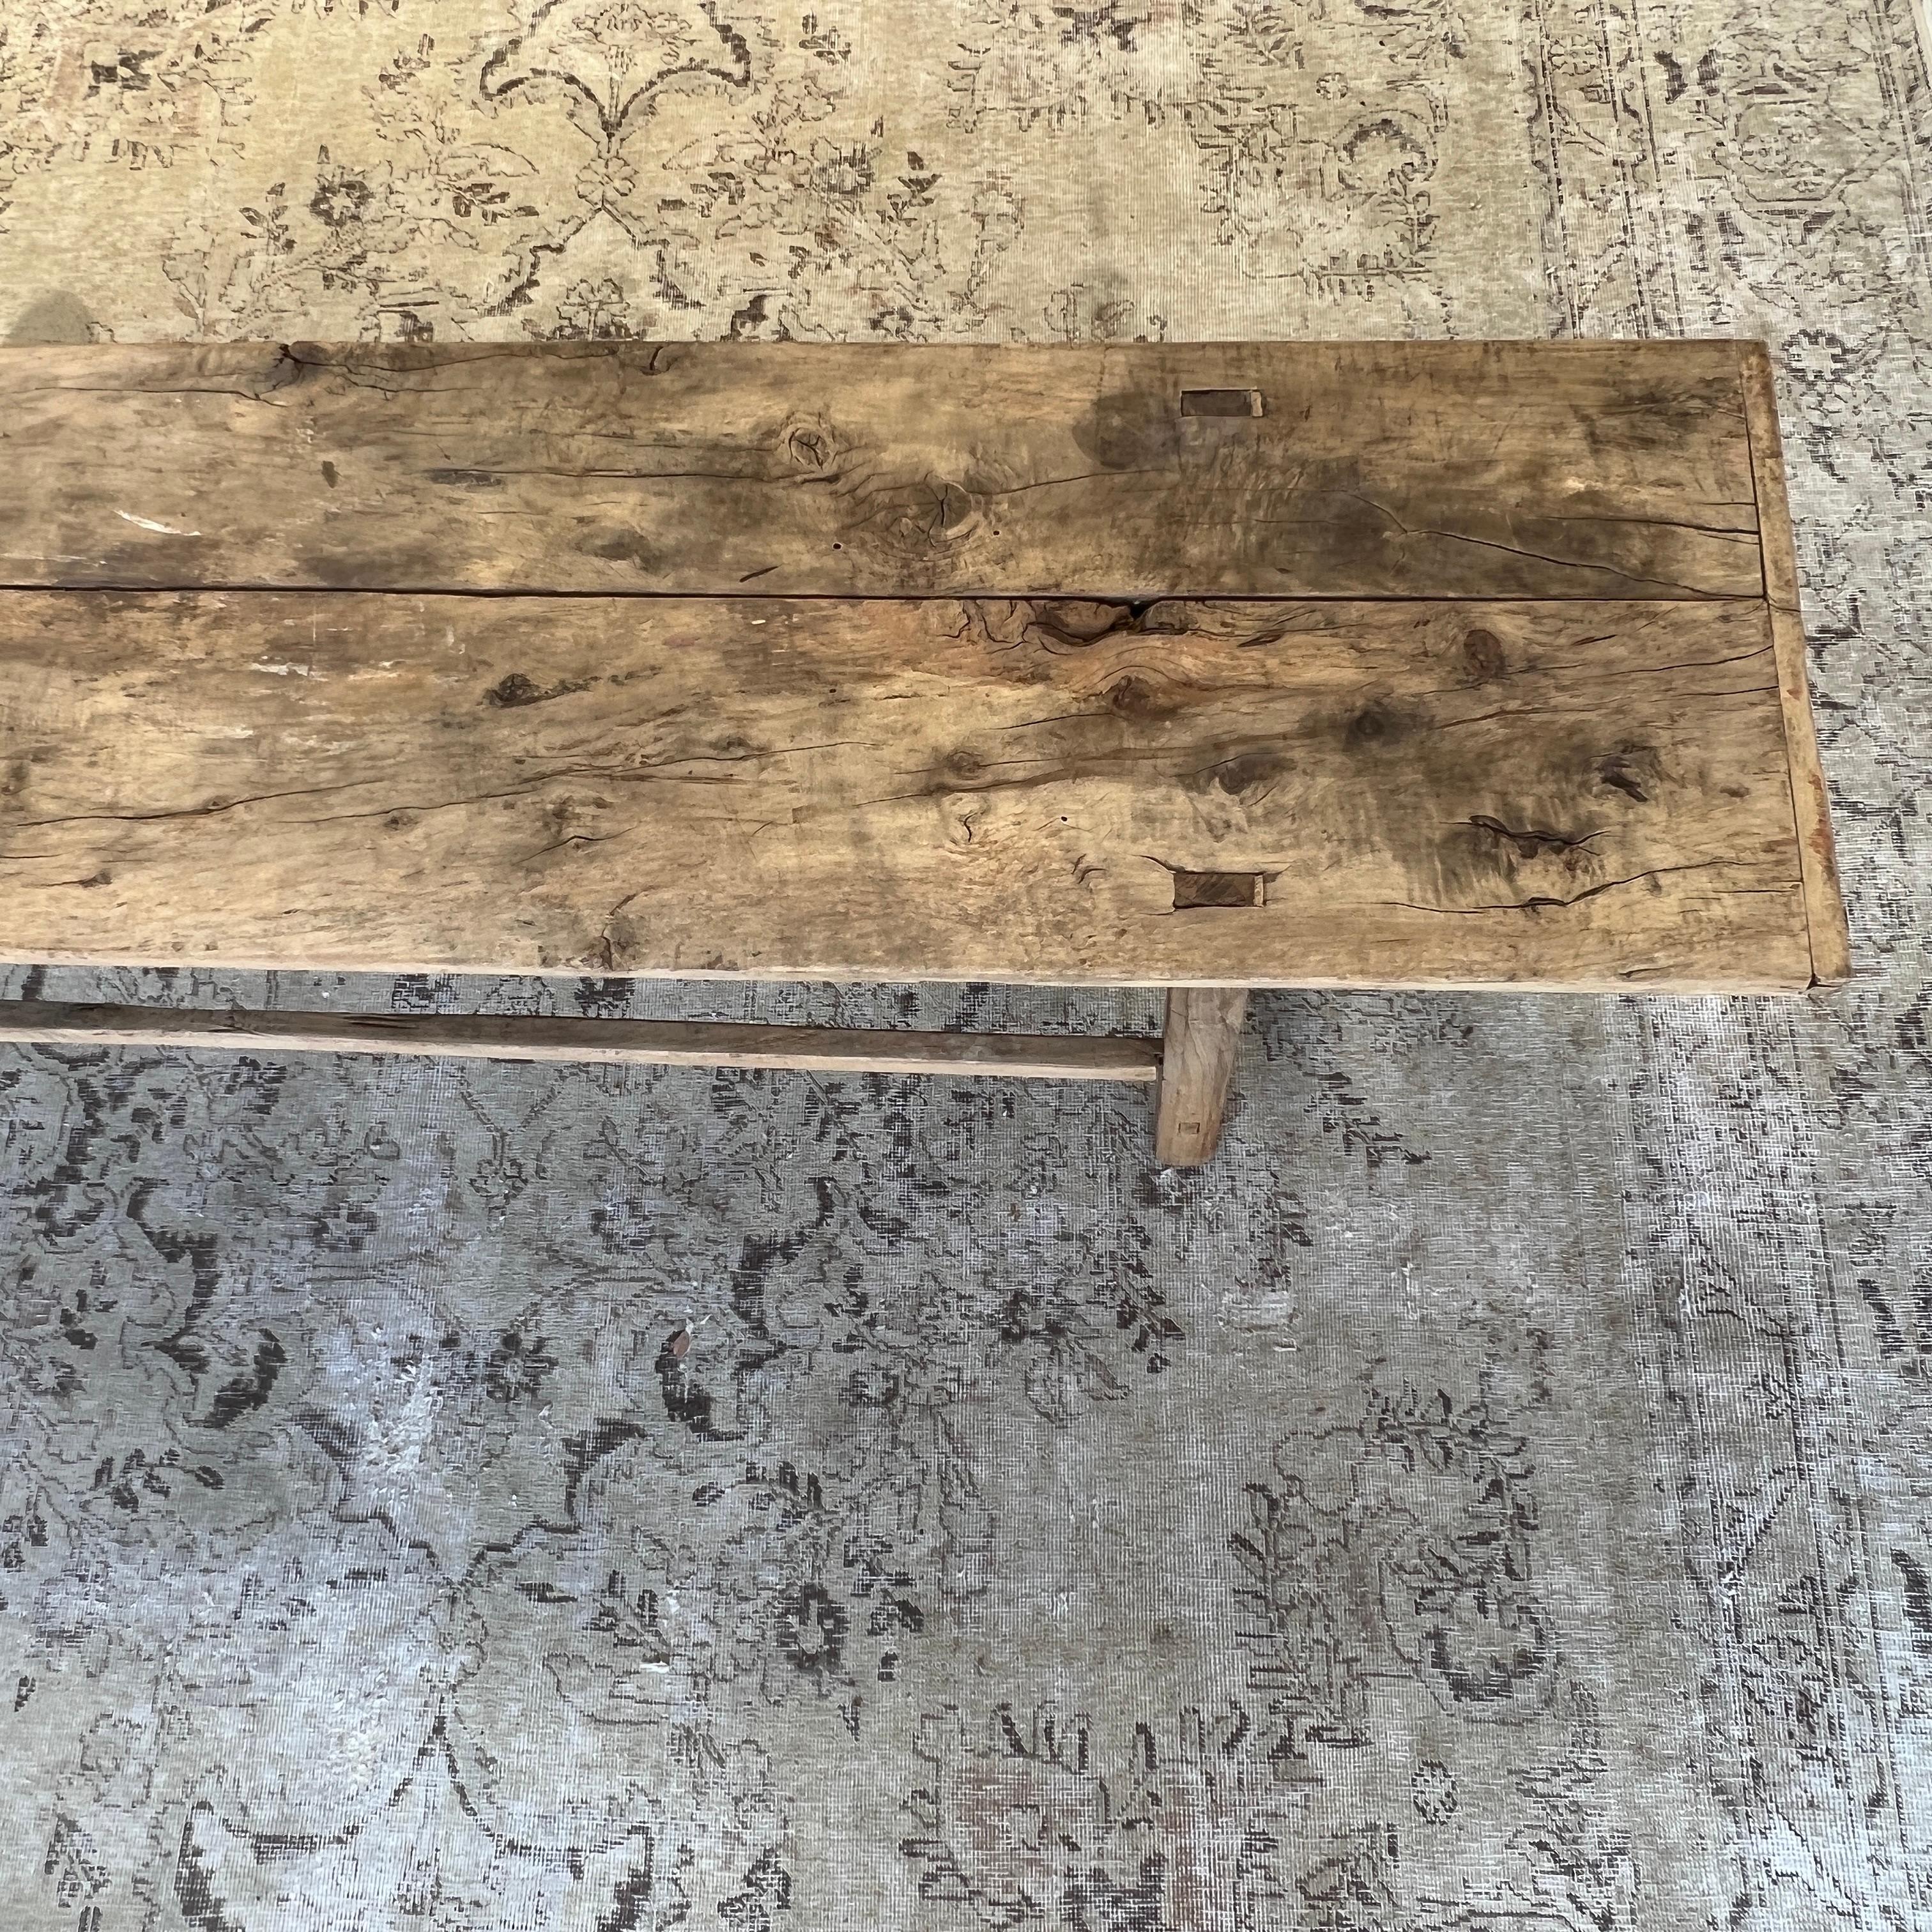 Elm Wood Wide Seat Bench or Coffee Table 4